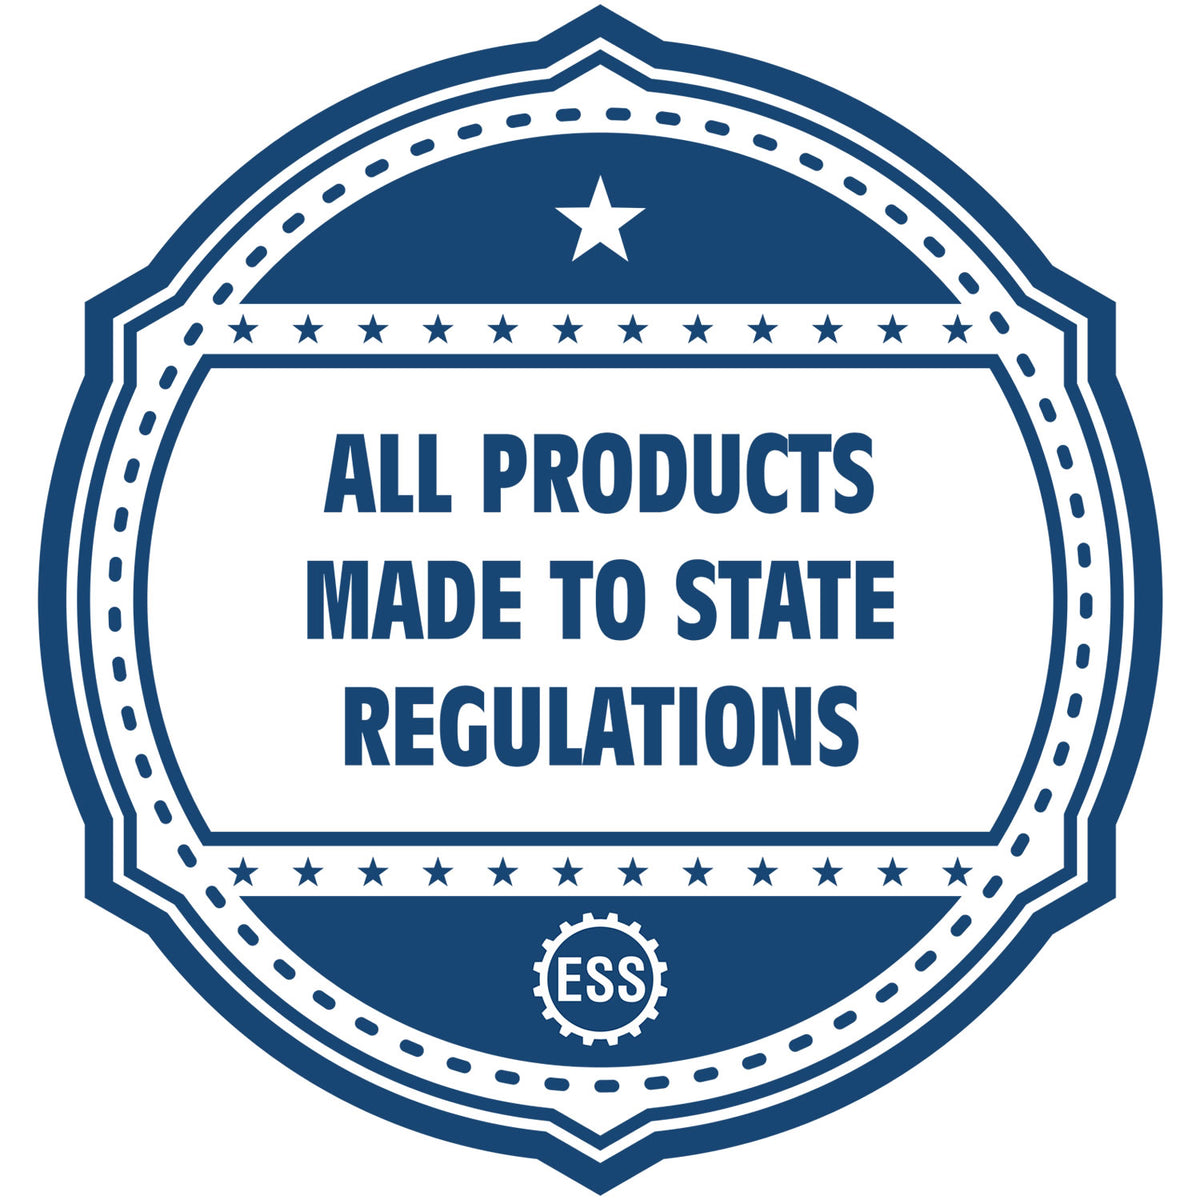 An icon or badge element for the State of West Virginia Extended Long Reach Engineer Seal showing that this product is made in compliance with state regulations.